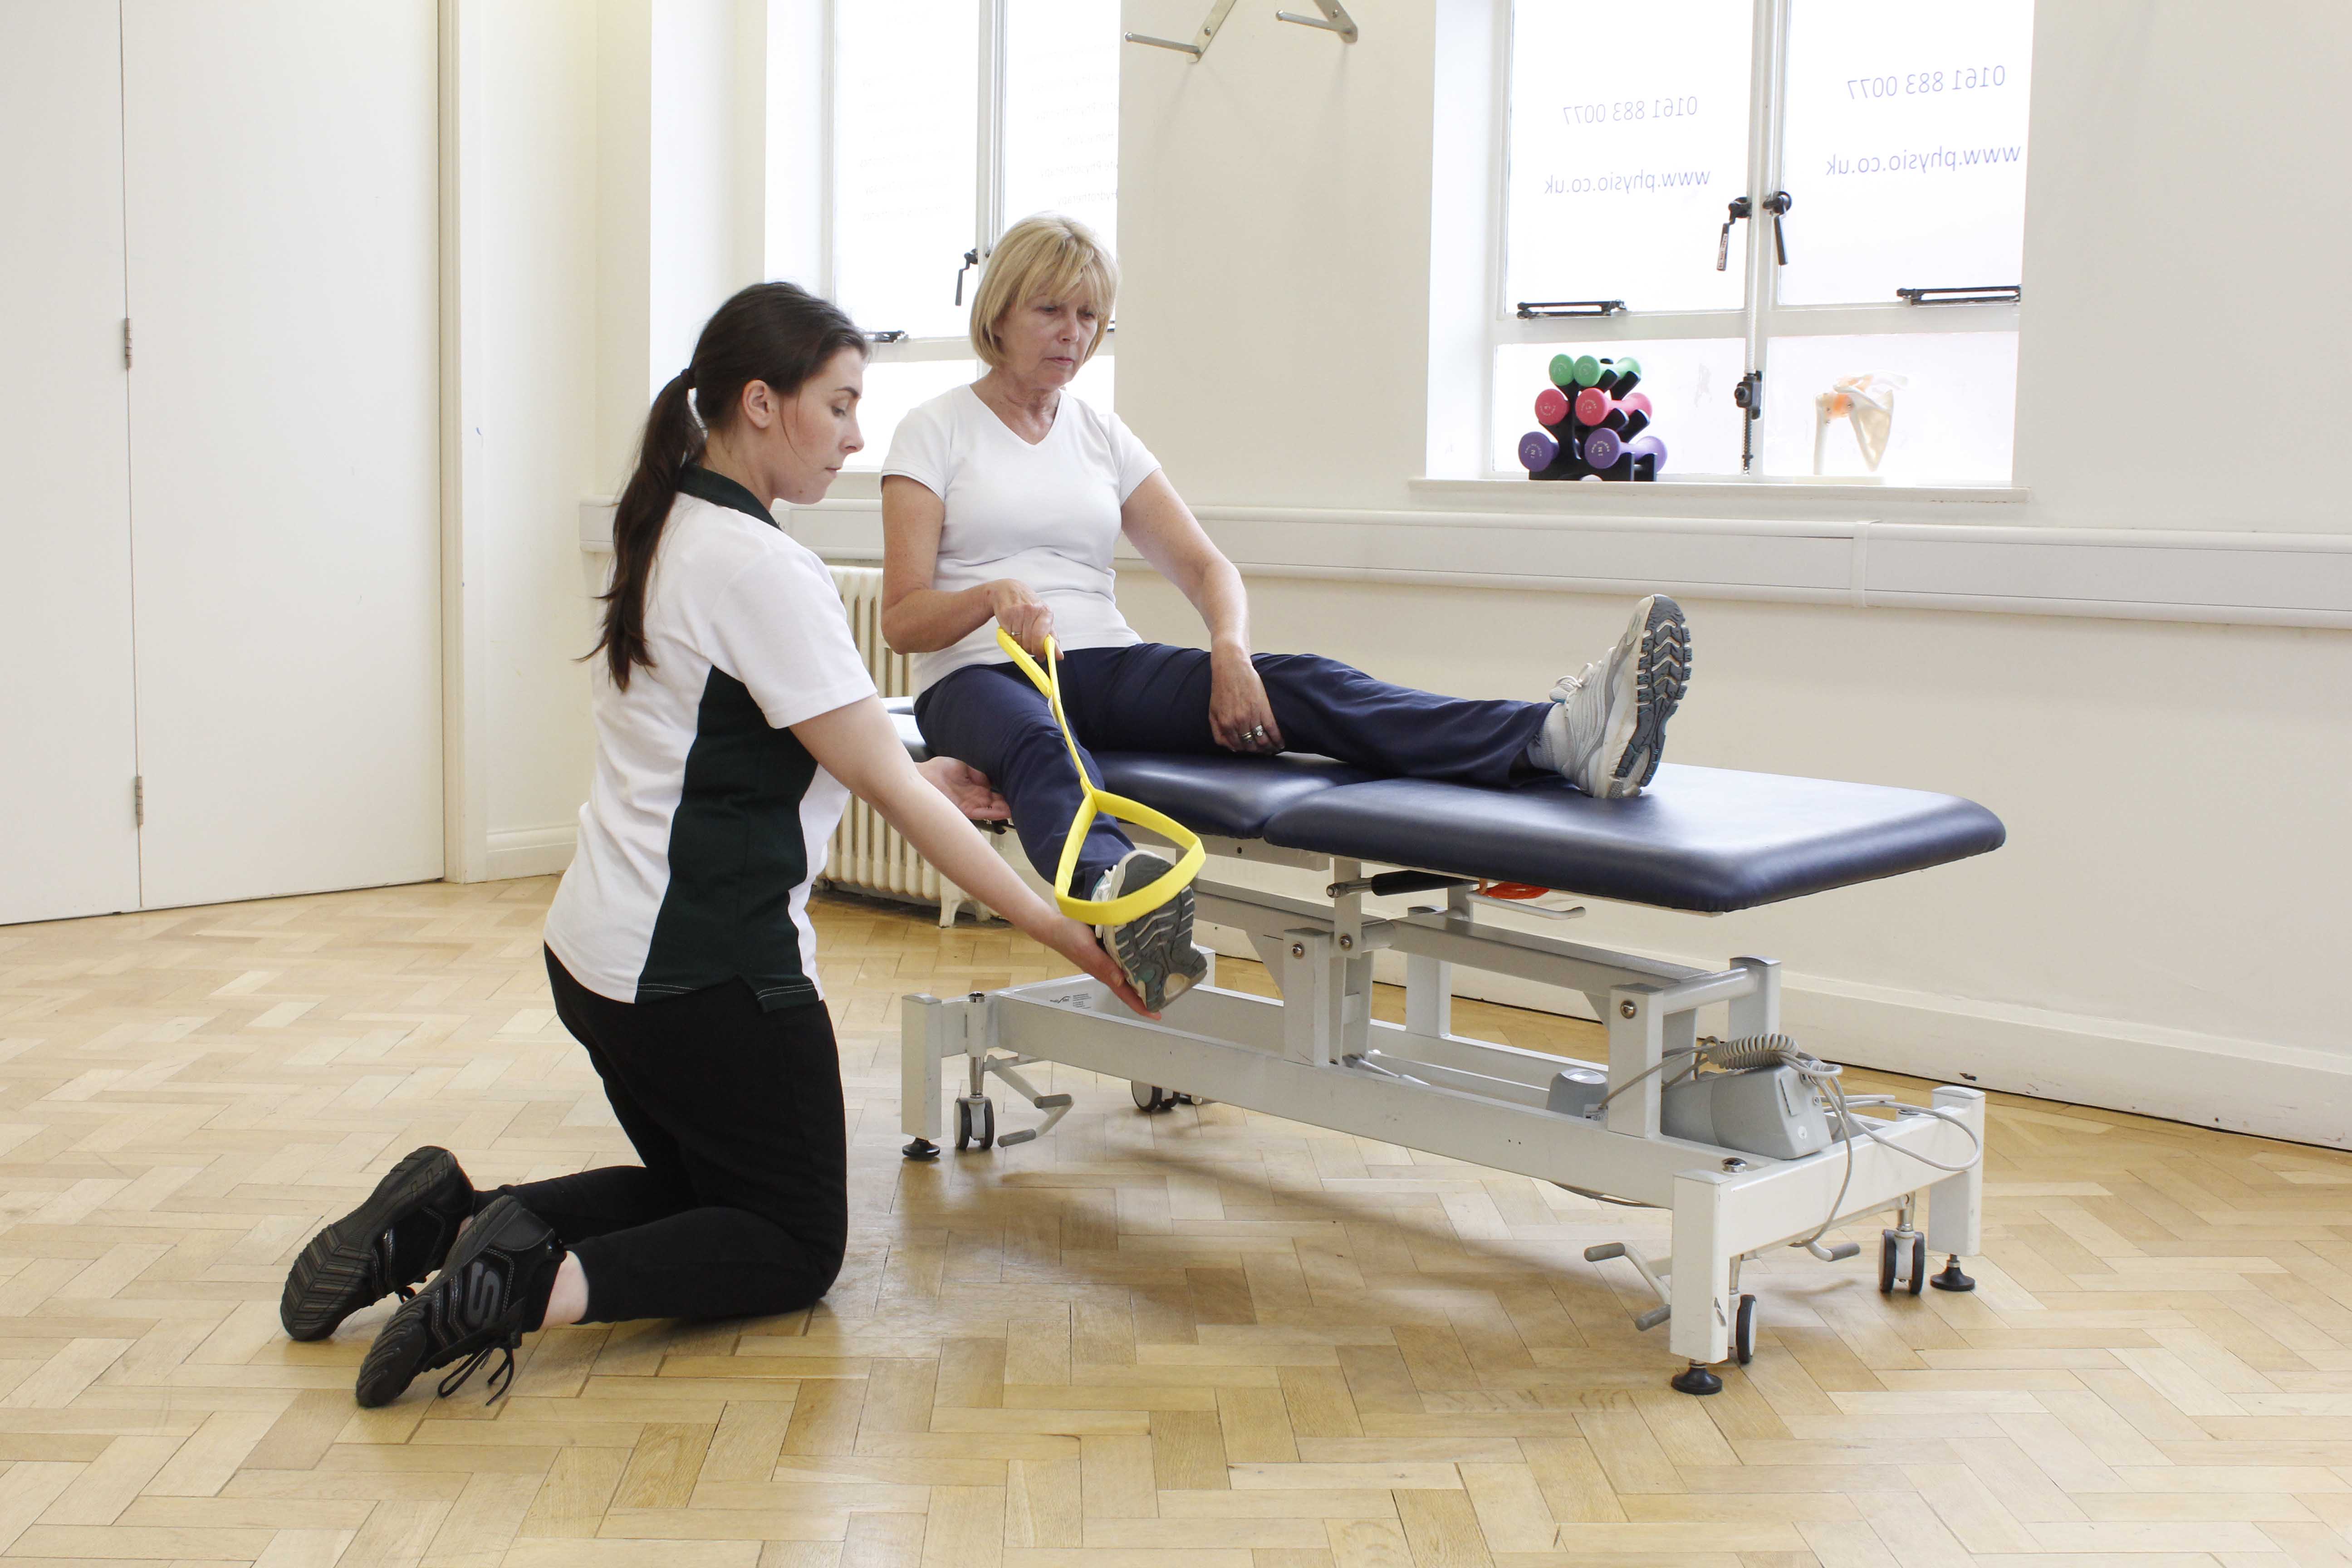 Occupational therapist assisting client with exercises to transfer in and out of bed